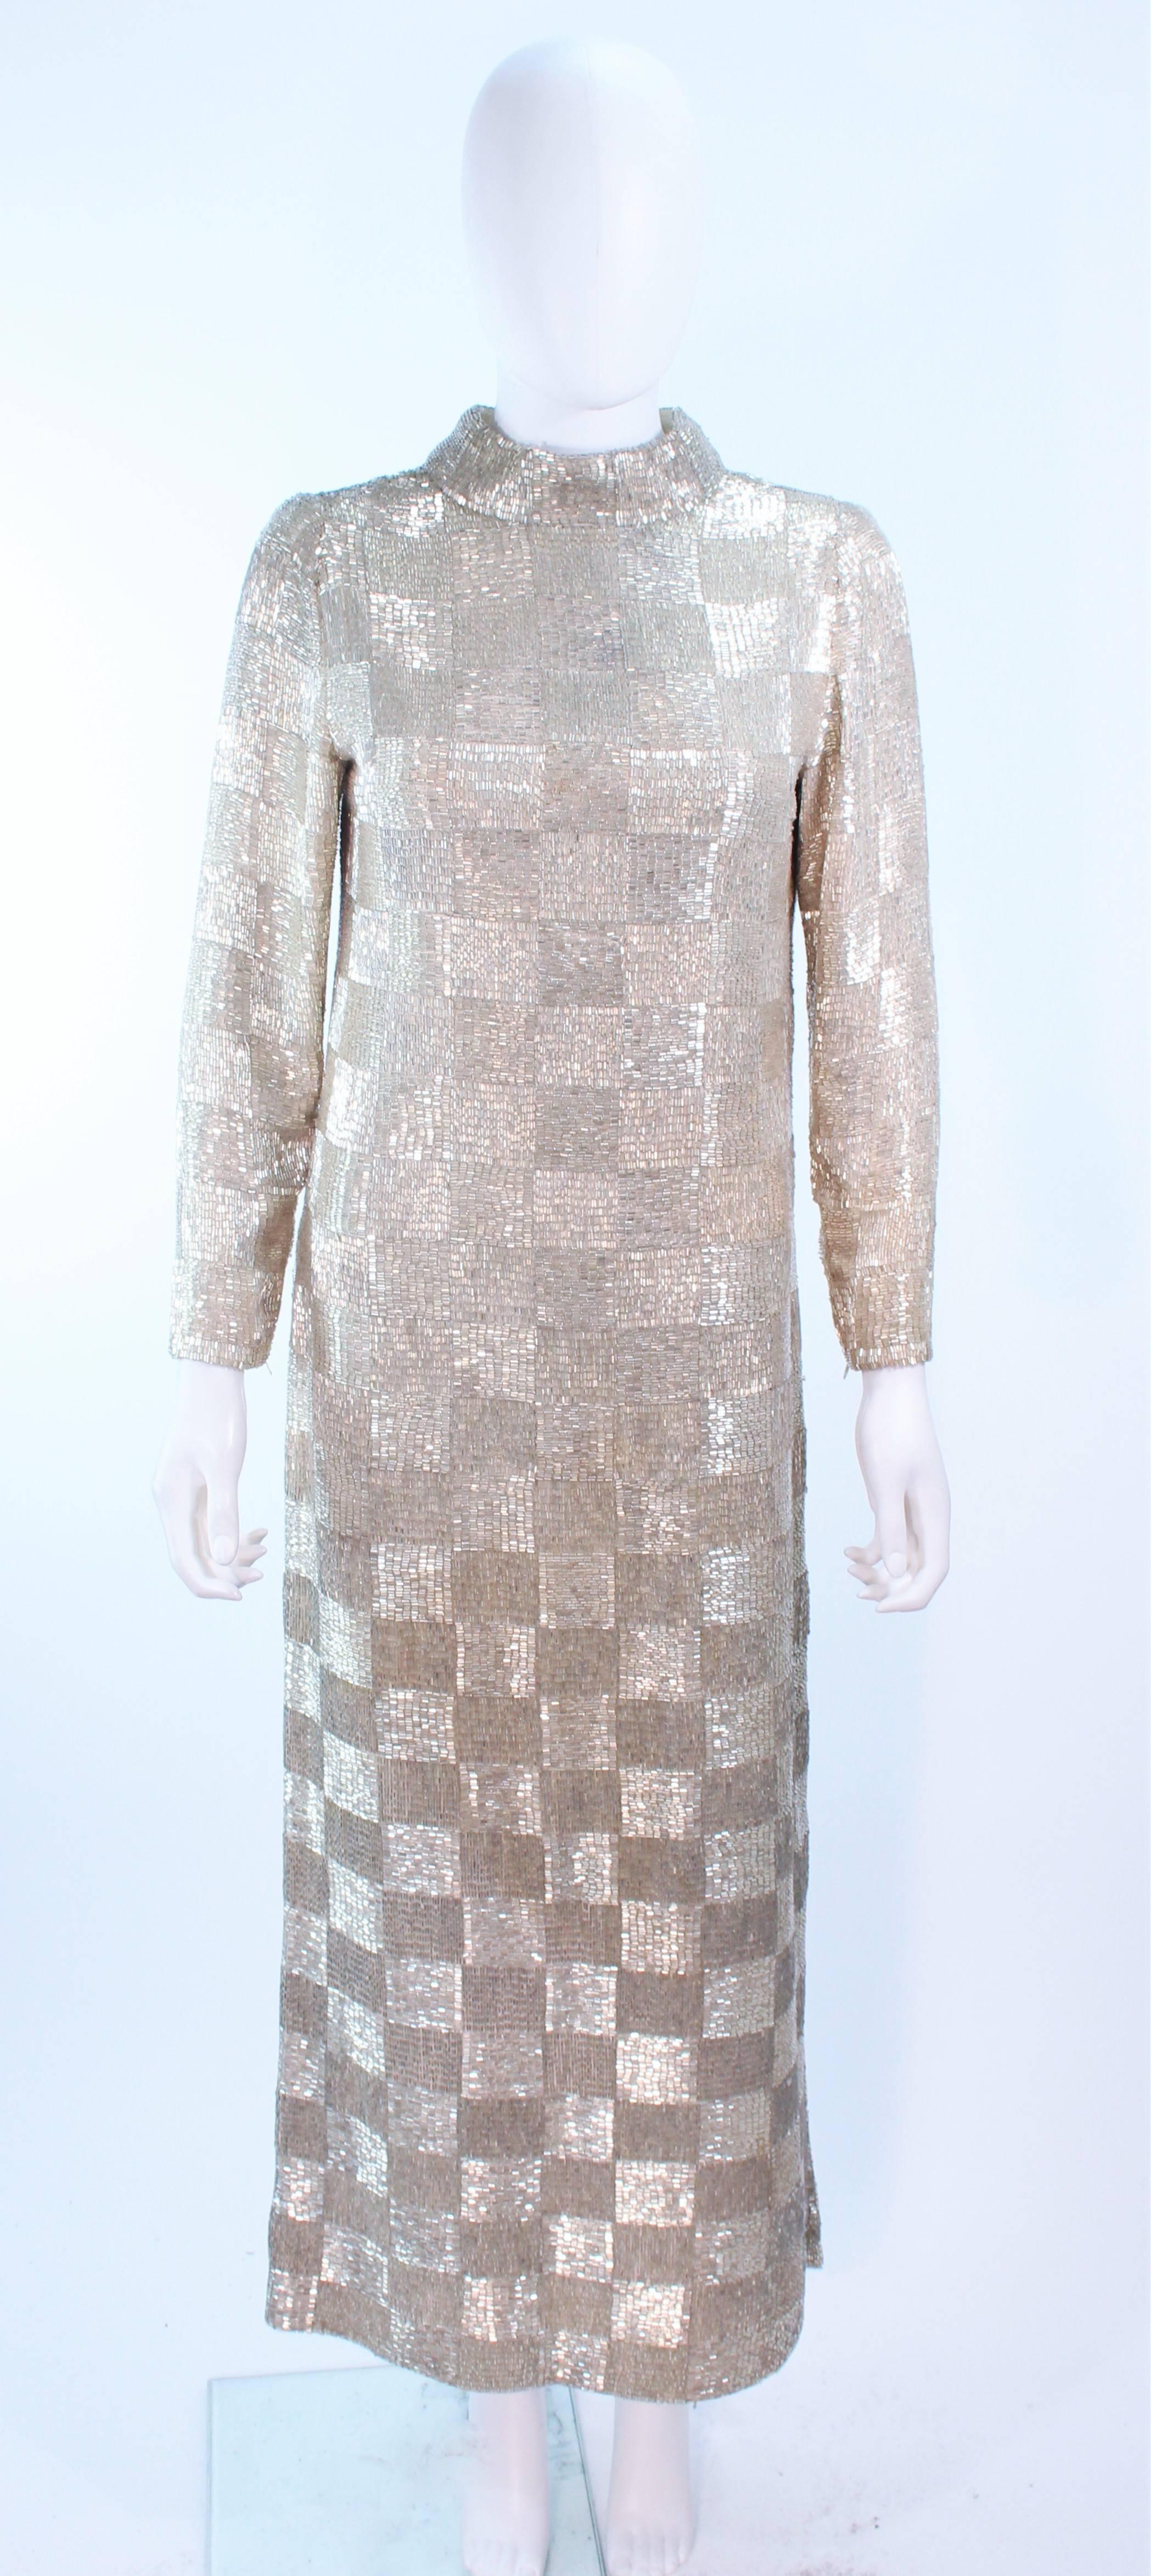 This Donald Brooks gown is composed of hand-beaded, silver beading in a checkerboard pattern. The interior lining has some staining and could use replacement, or cleaning. There is a center back zipper closure. This gown is shown with the zipper at